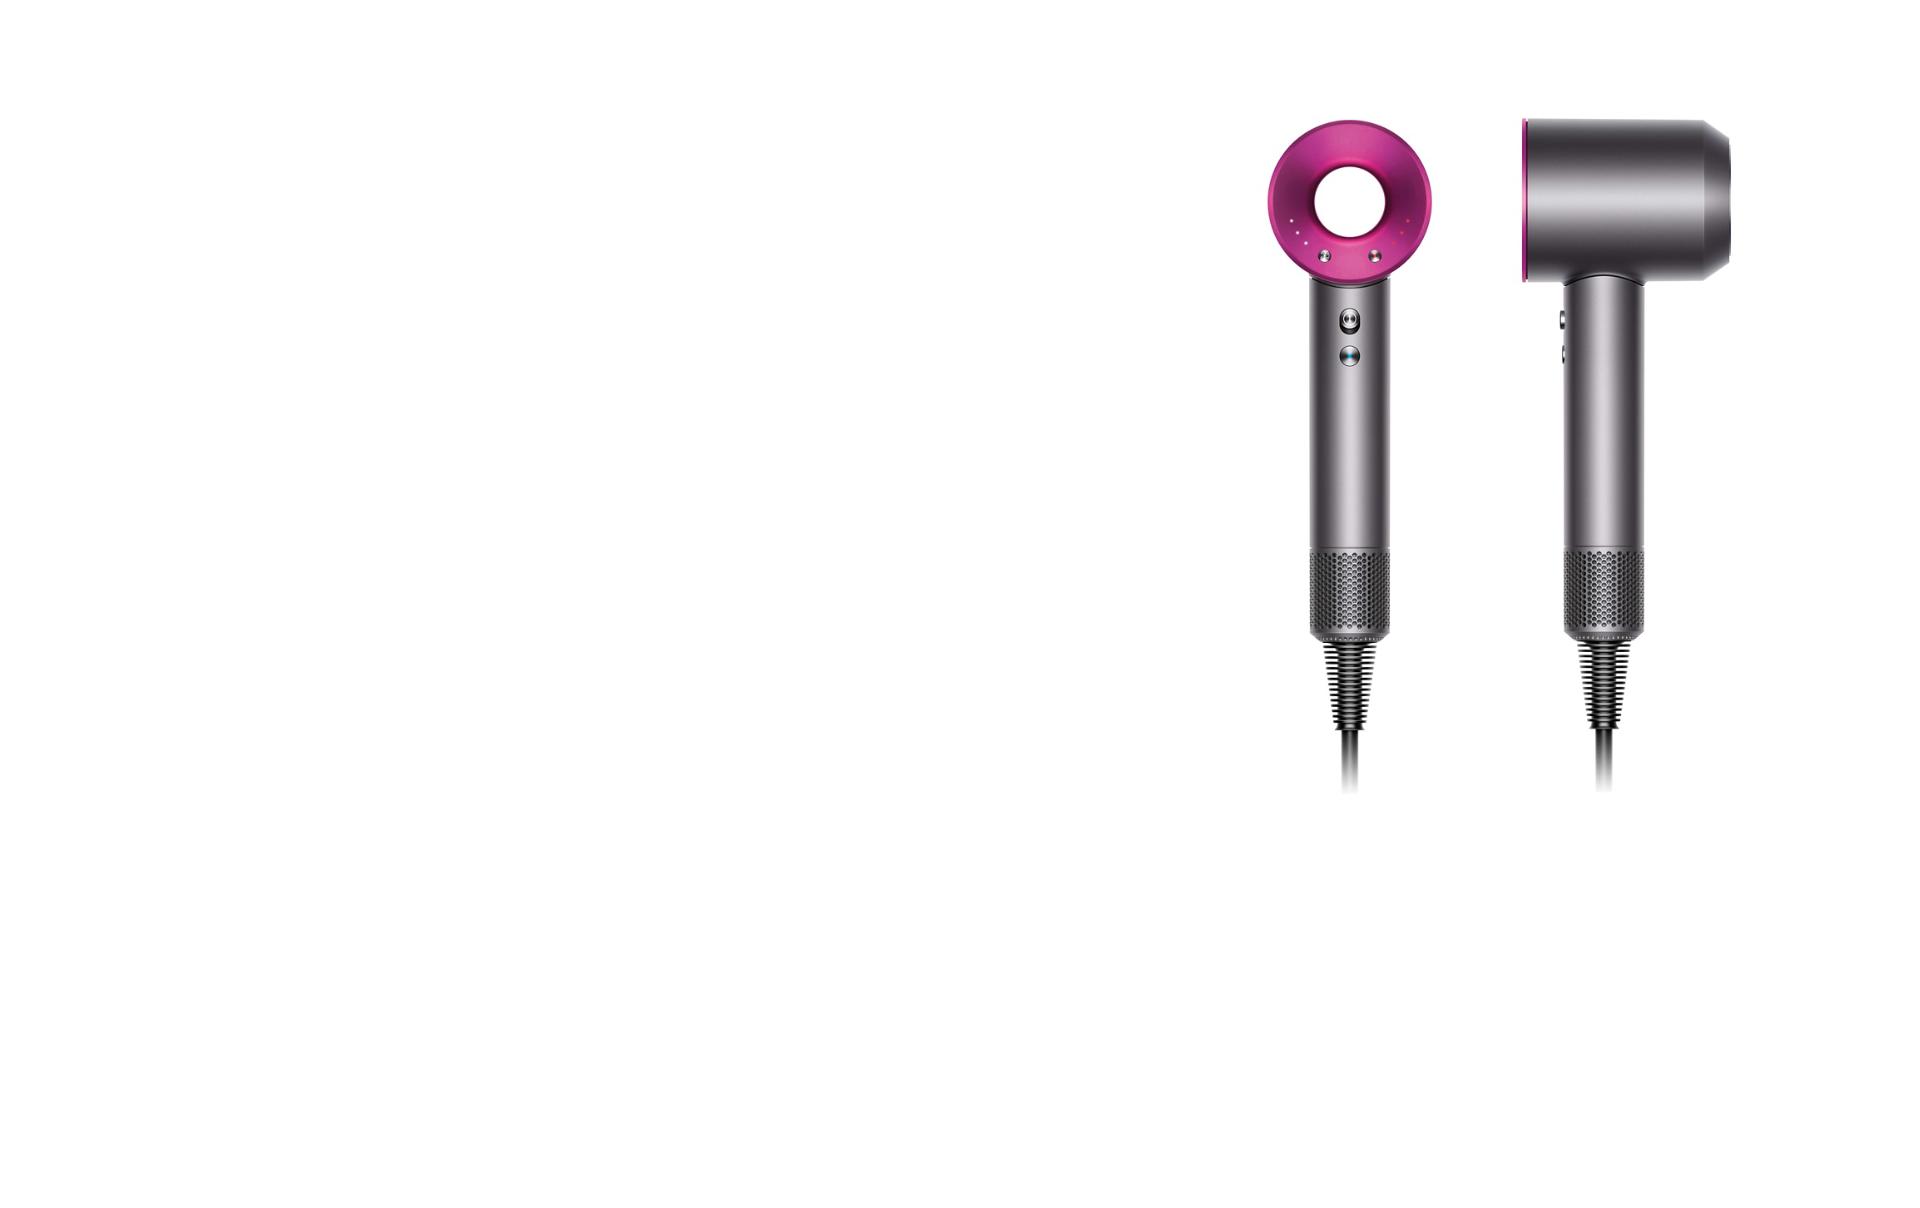 The Dyson Supersonic from front angle and side